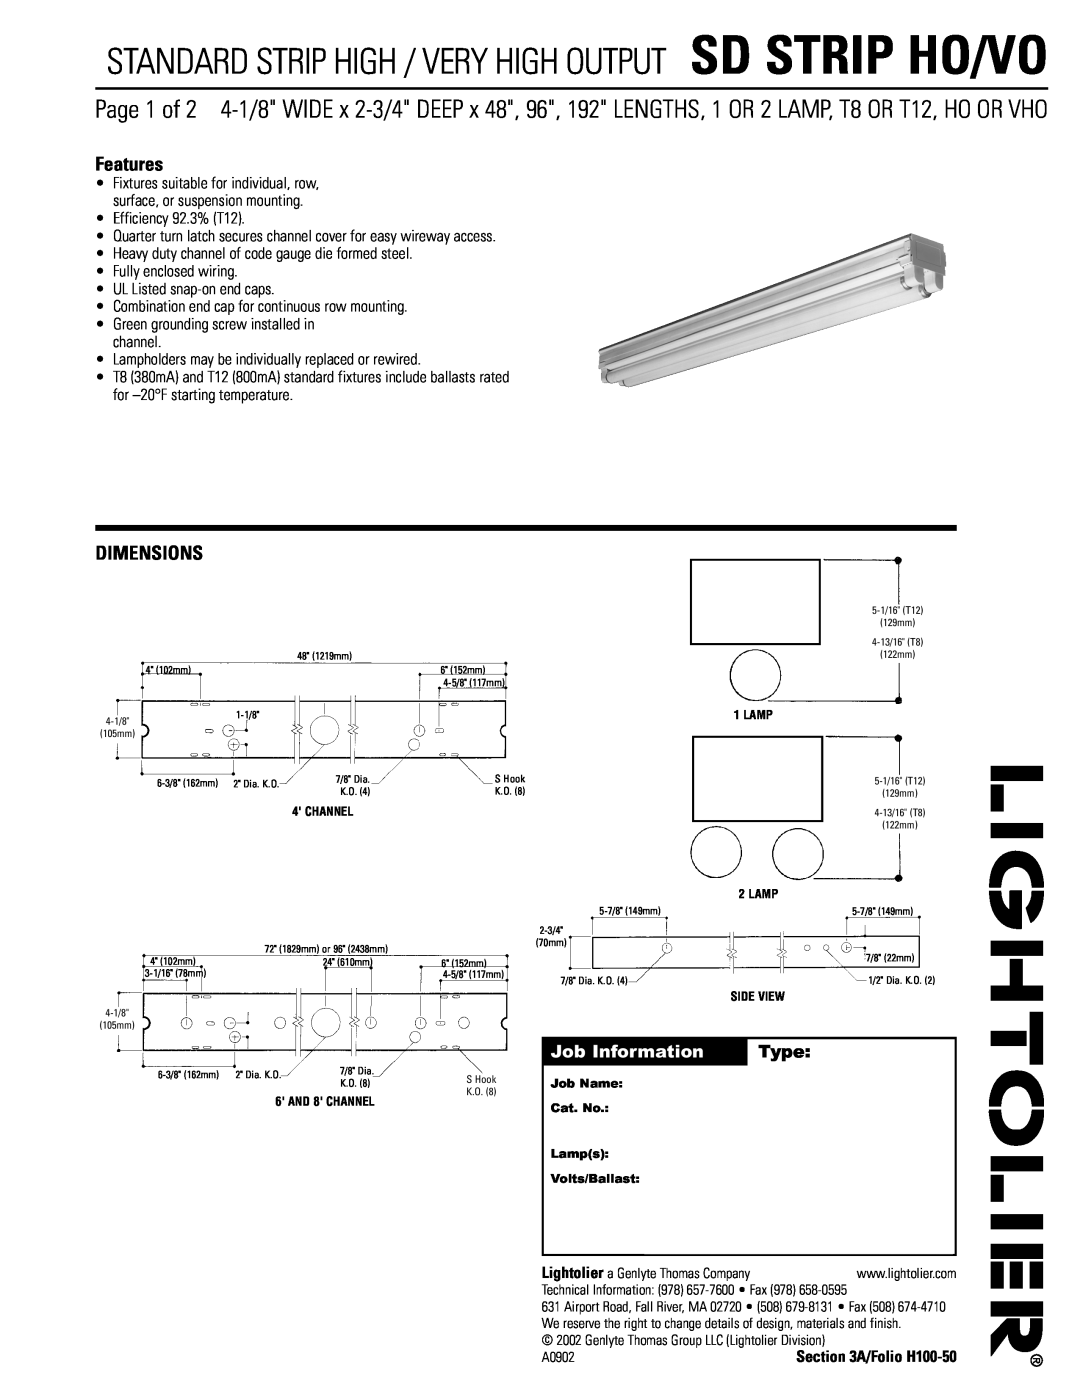 Lightolier SD STRIP HO-VO dimensions Features, Dimensions, Job Information, Type 